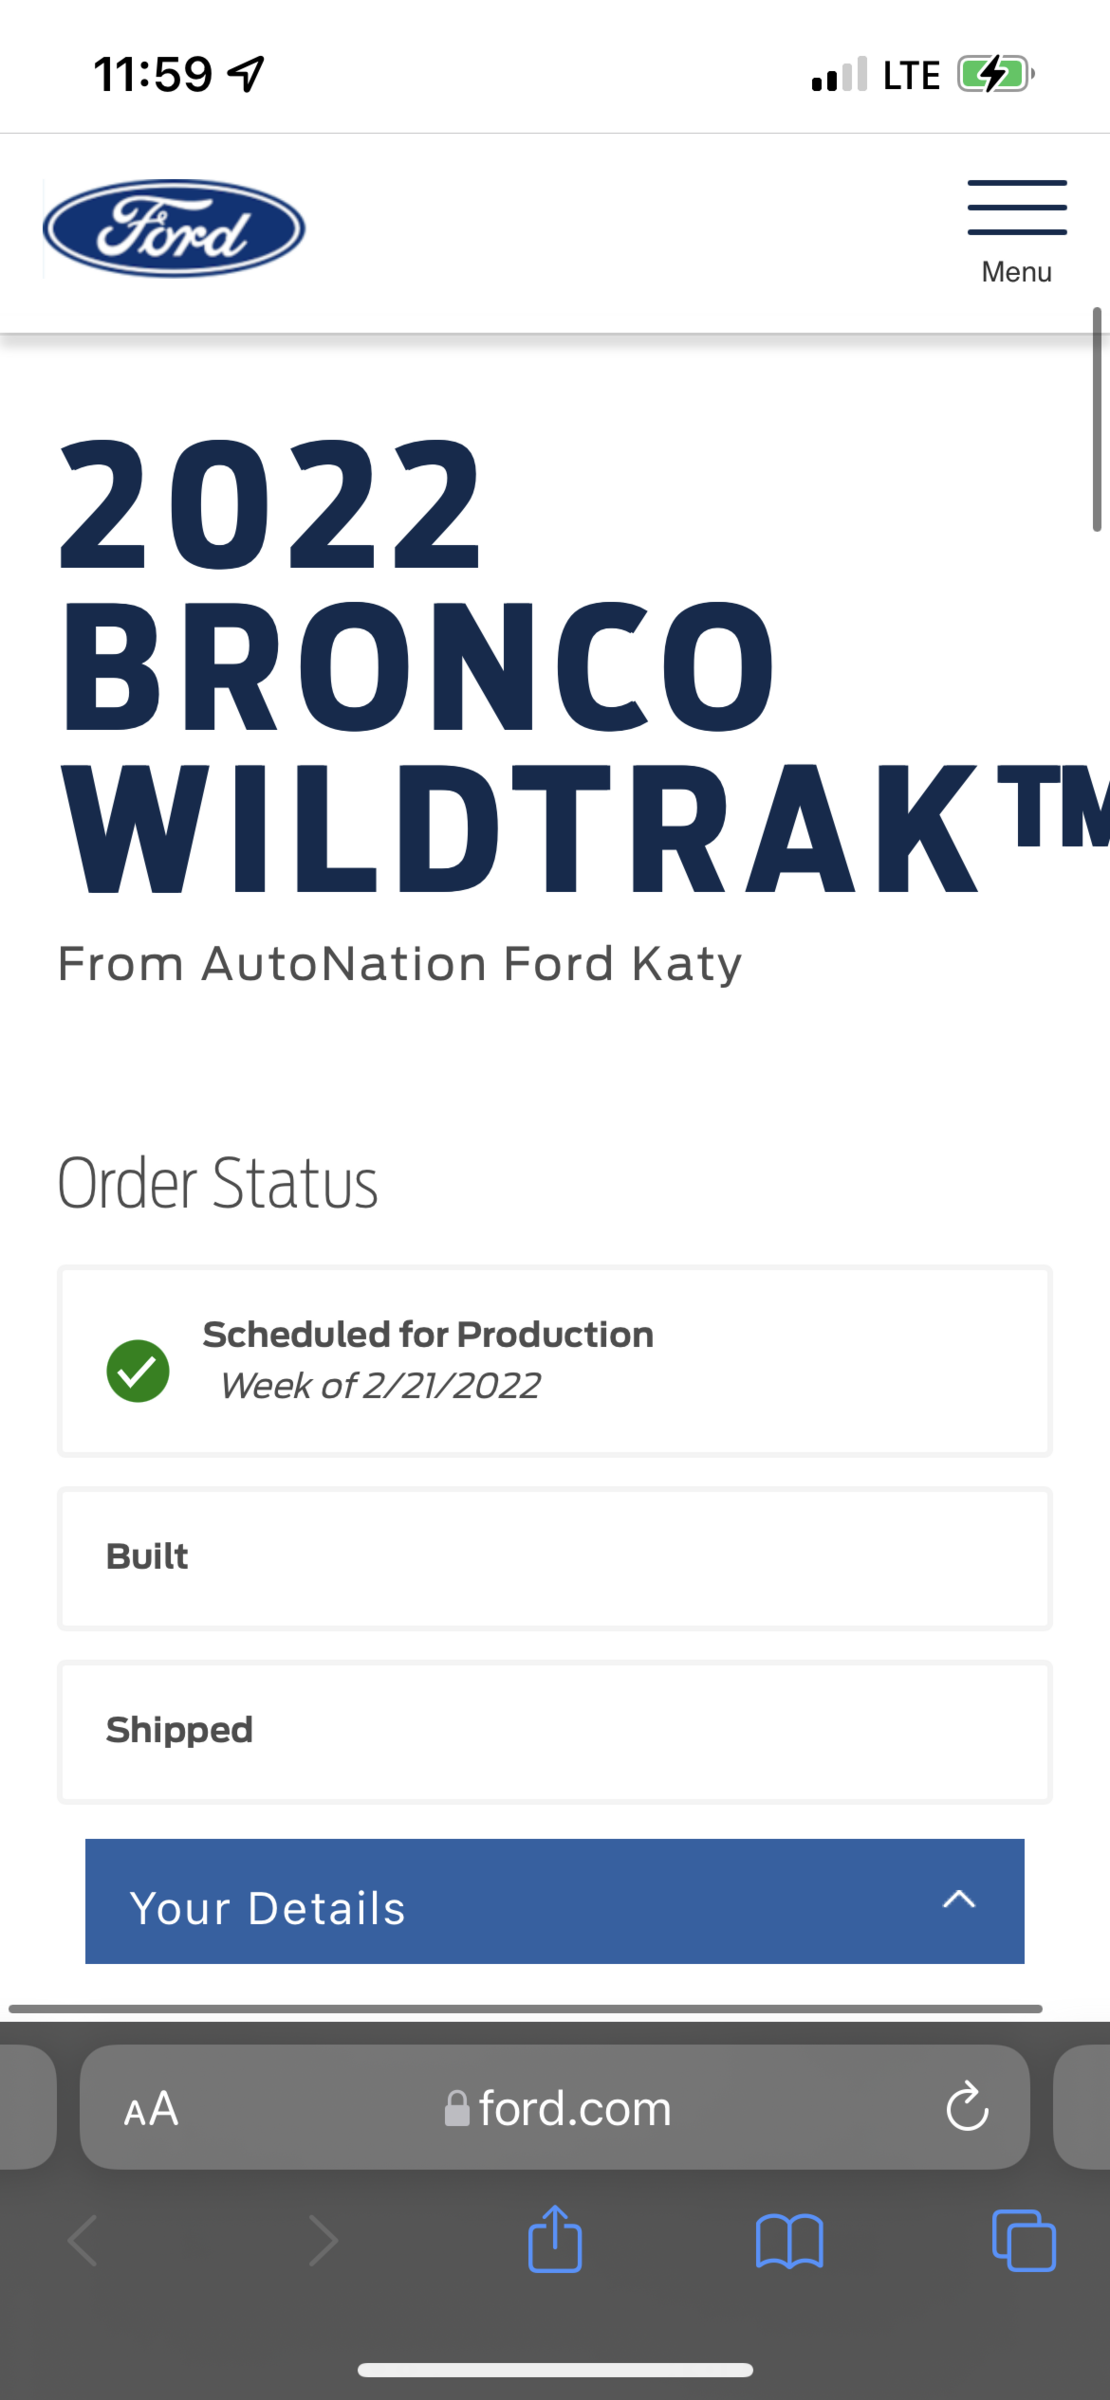 Ford Bronco [SCHEDULING NOW 12/16] ⏱ 2022 Bronco Scheduling Next Week (12/13) For Build Weeks 2/14 and 2/21 852060AD-2B65-4CA0-BEE8-8EB6FFD136B0